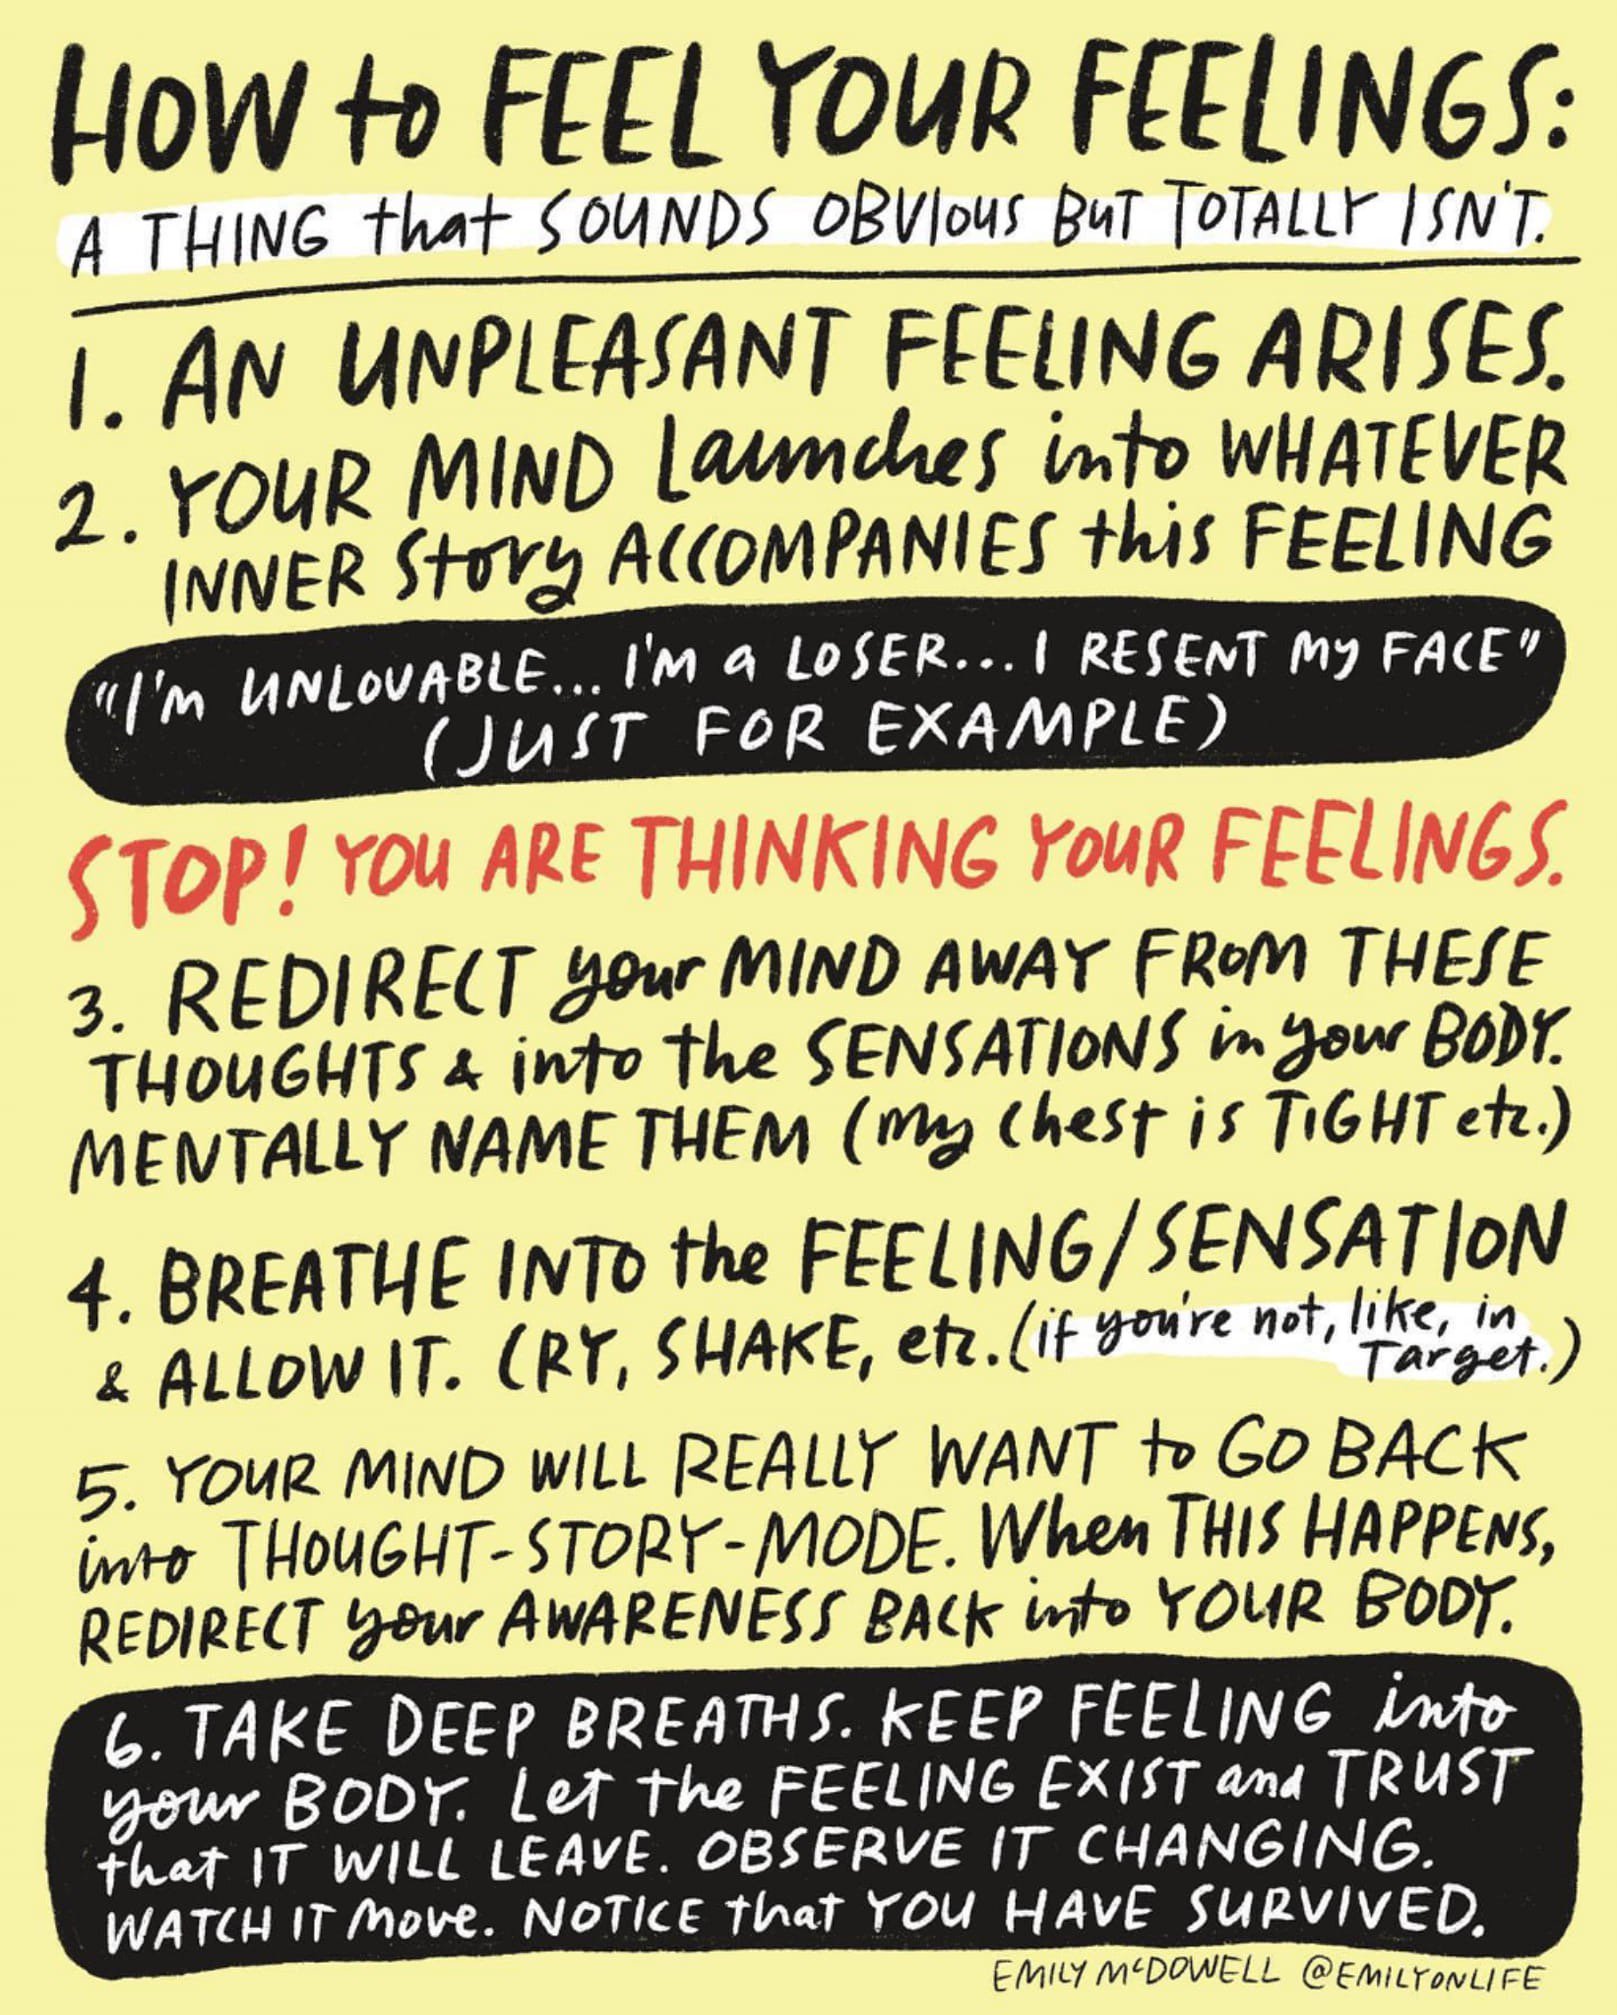 Everyday Mindfulness on X: How to feel your feelings Source